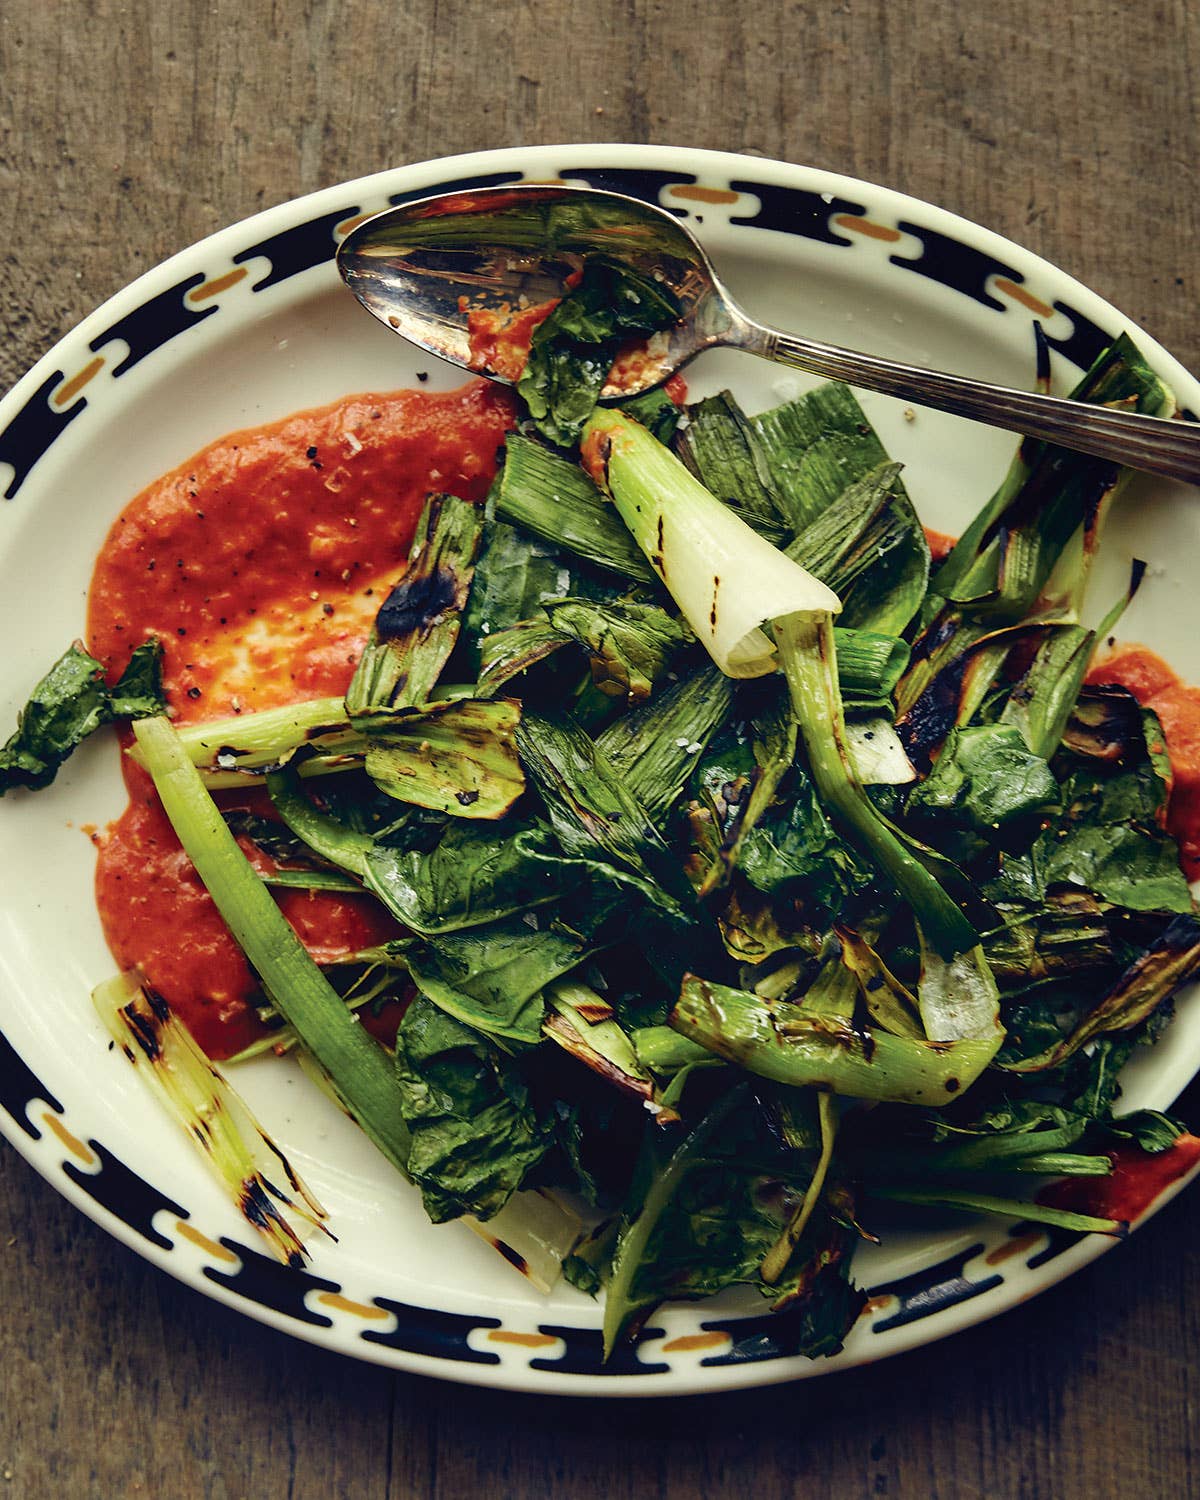 Grilled Greens and Leek Tops with Chile-Garlic Sauce